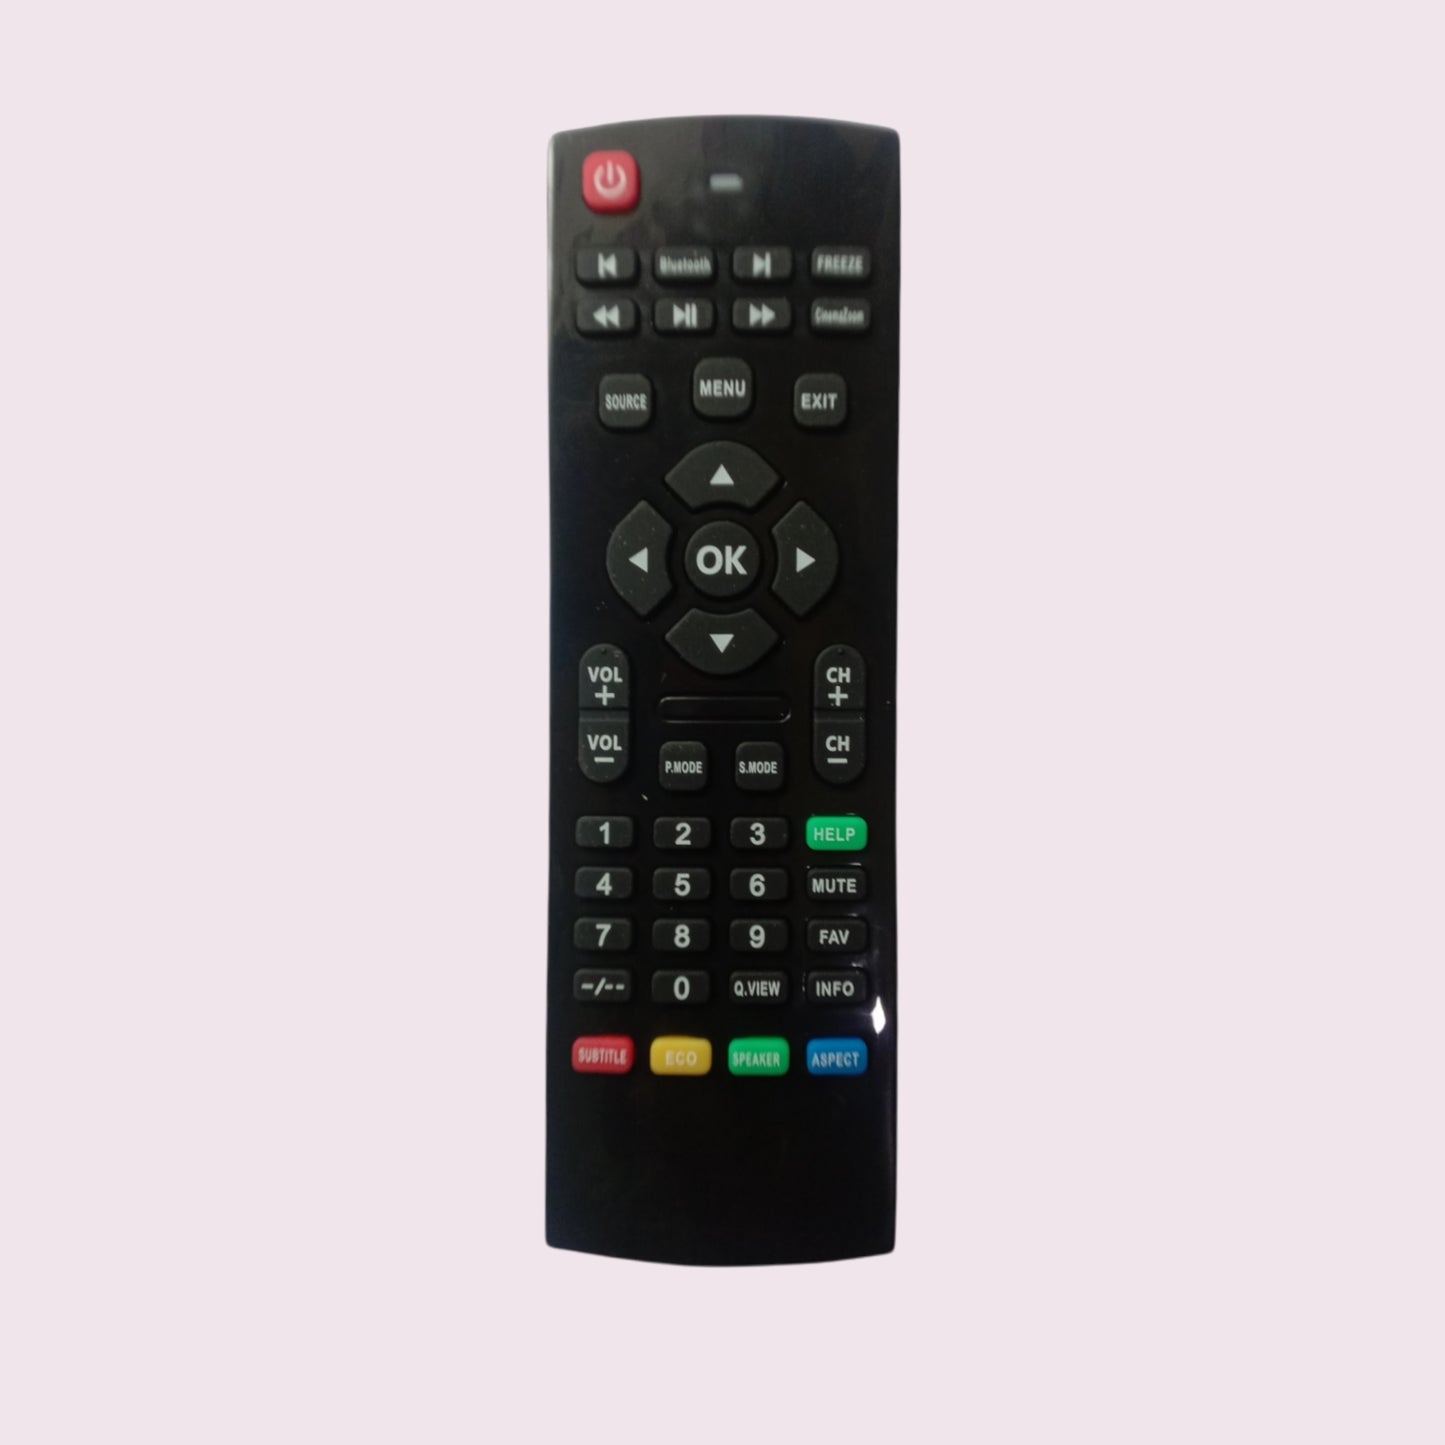 Noble skoida and Croma LCD Led TV Remote Control* Compatible*High Sensitivity